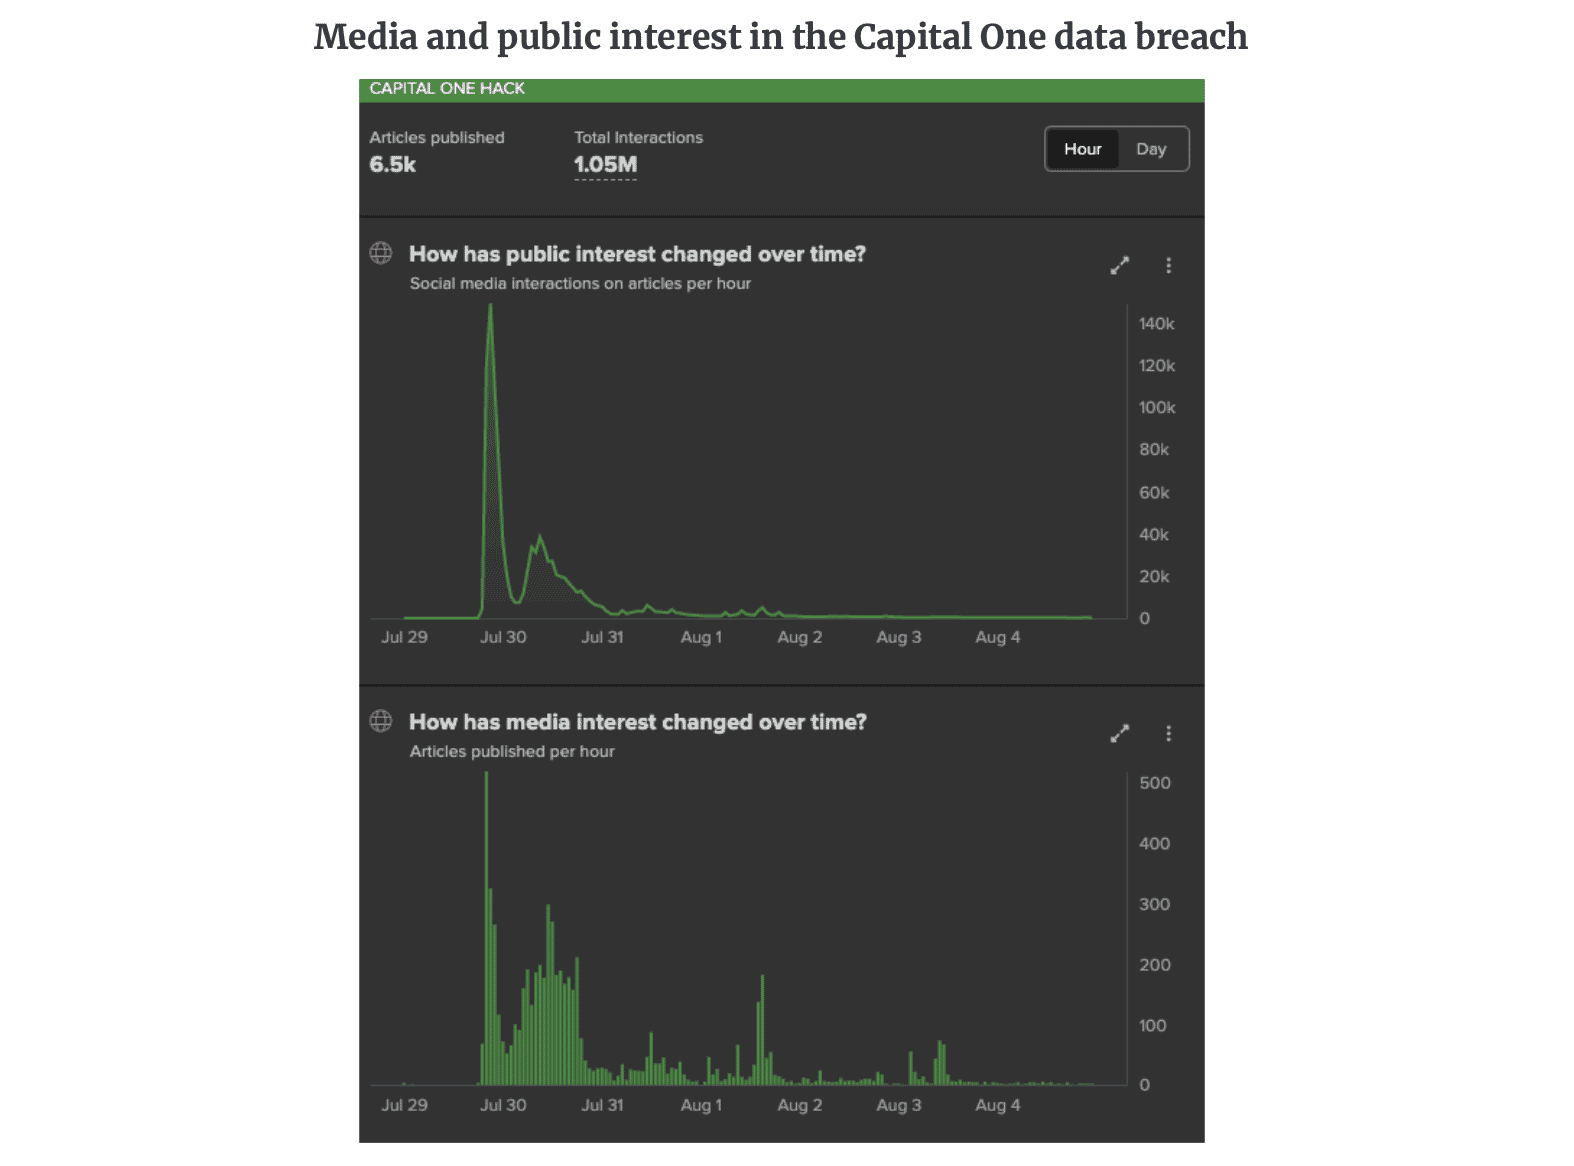 Chart showing the media and public interest in the Capital One data breach